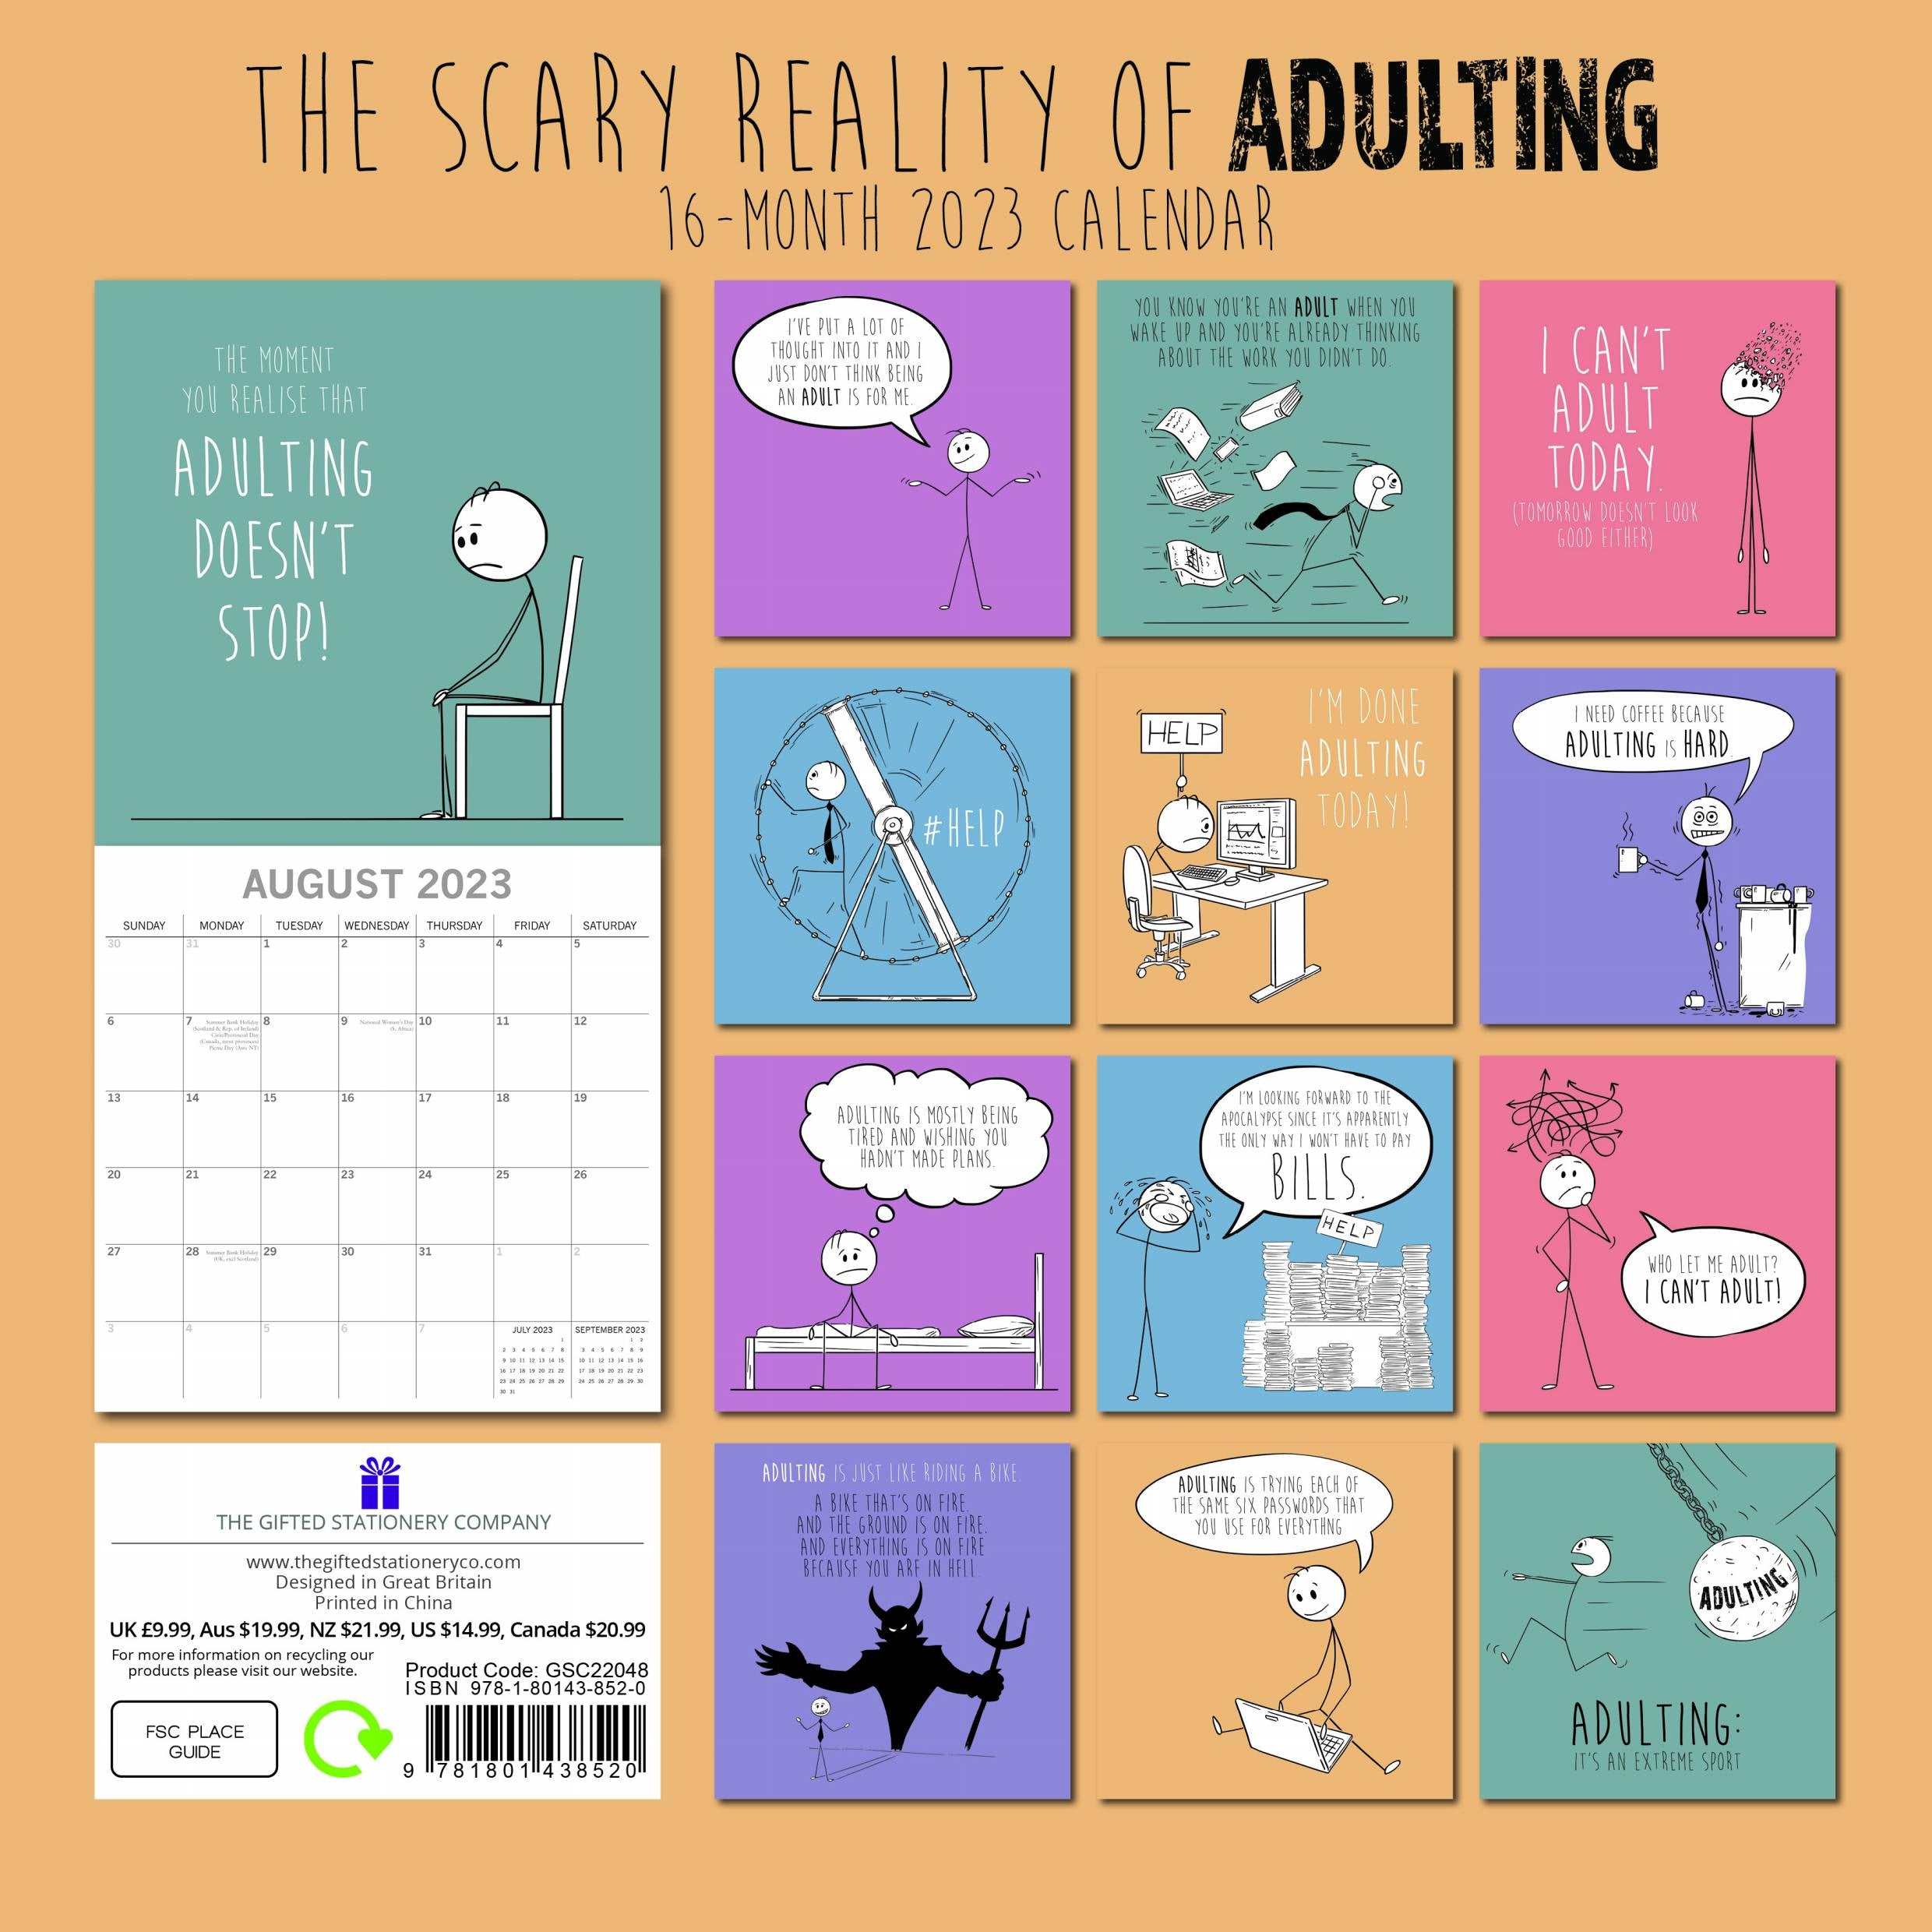 2023 The Scary Reality of Adulting - Square Wall Calendar